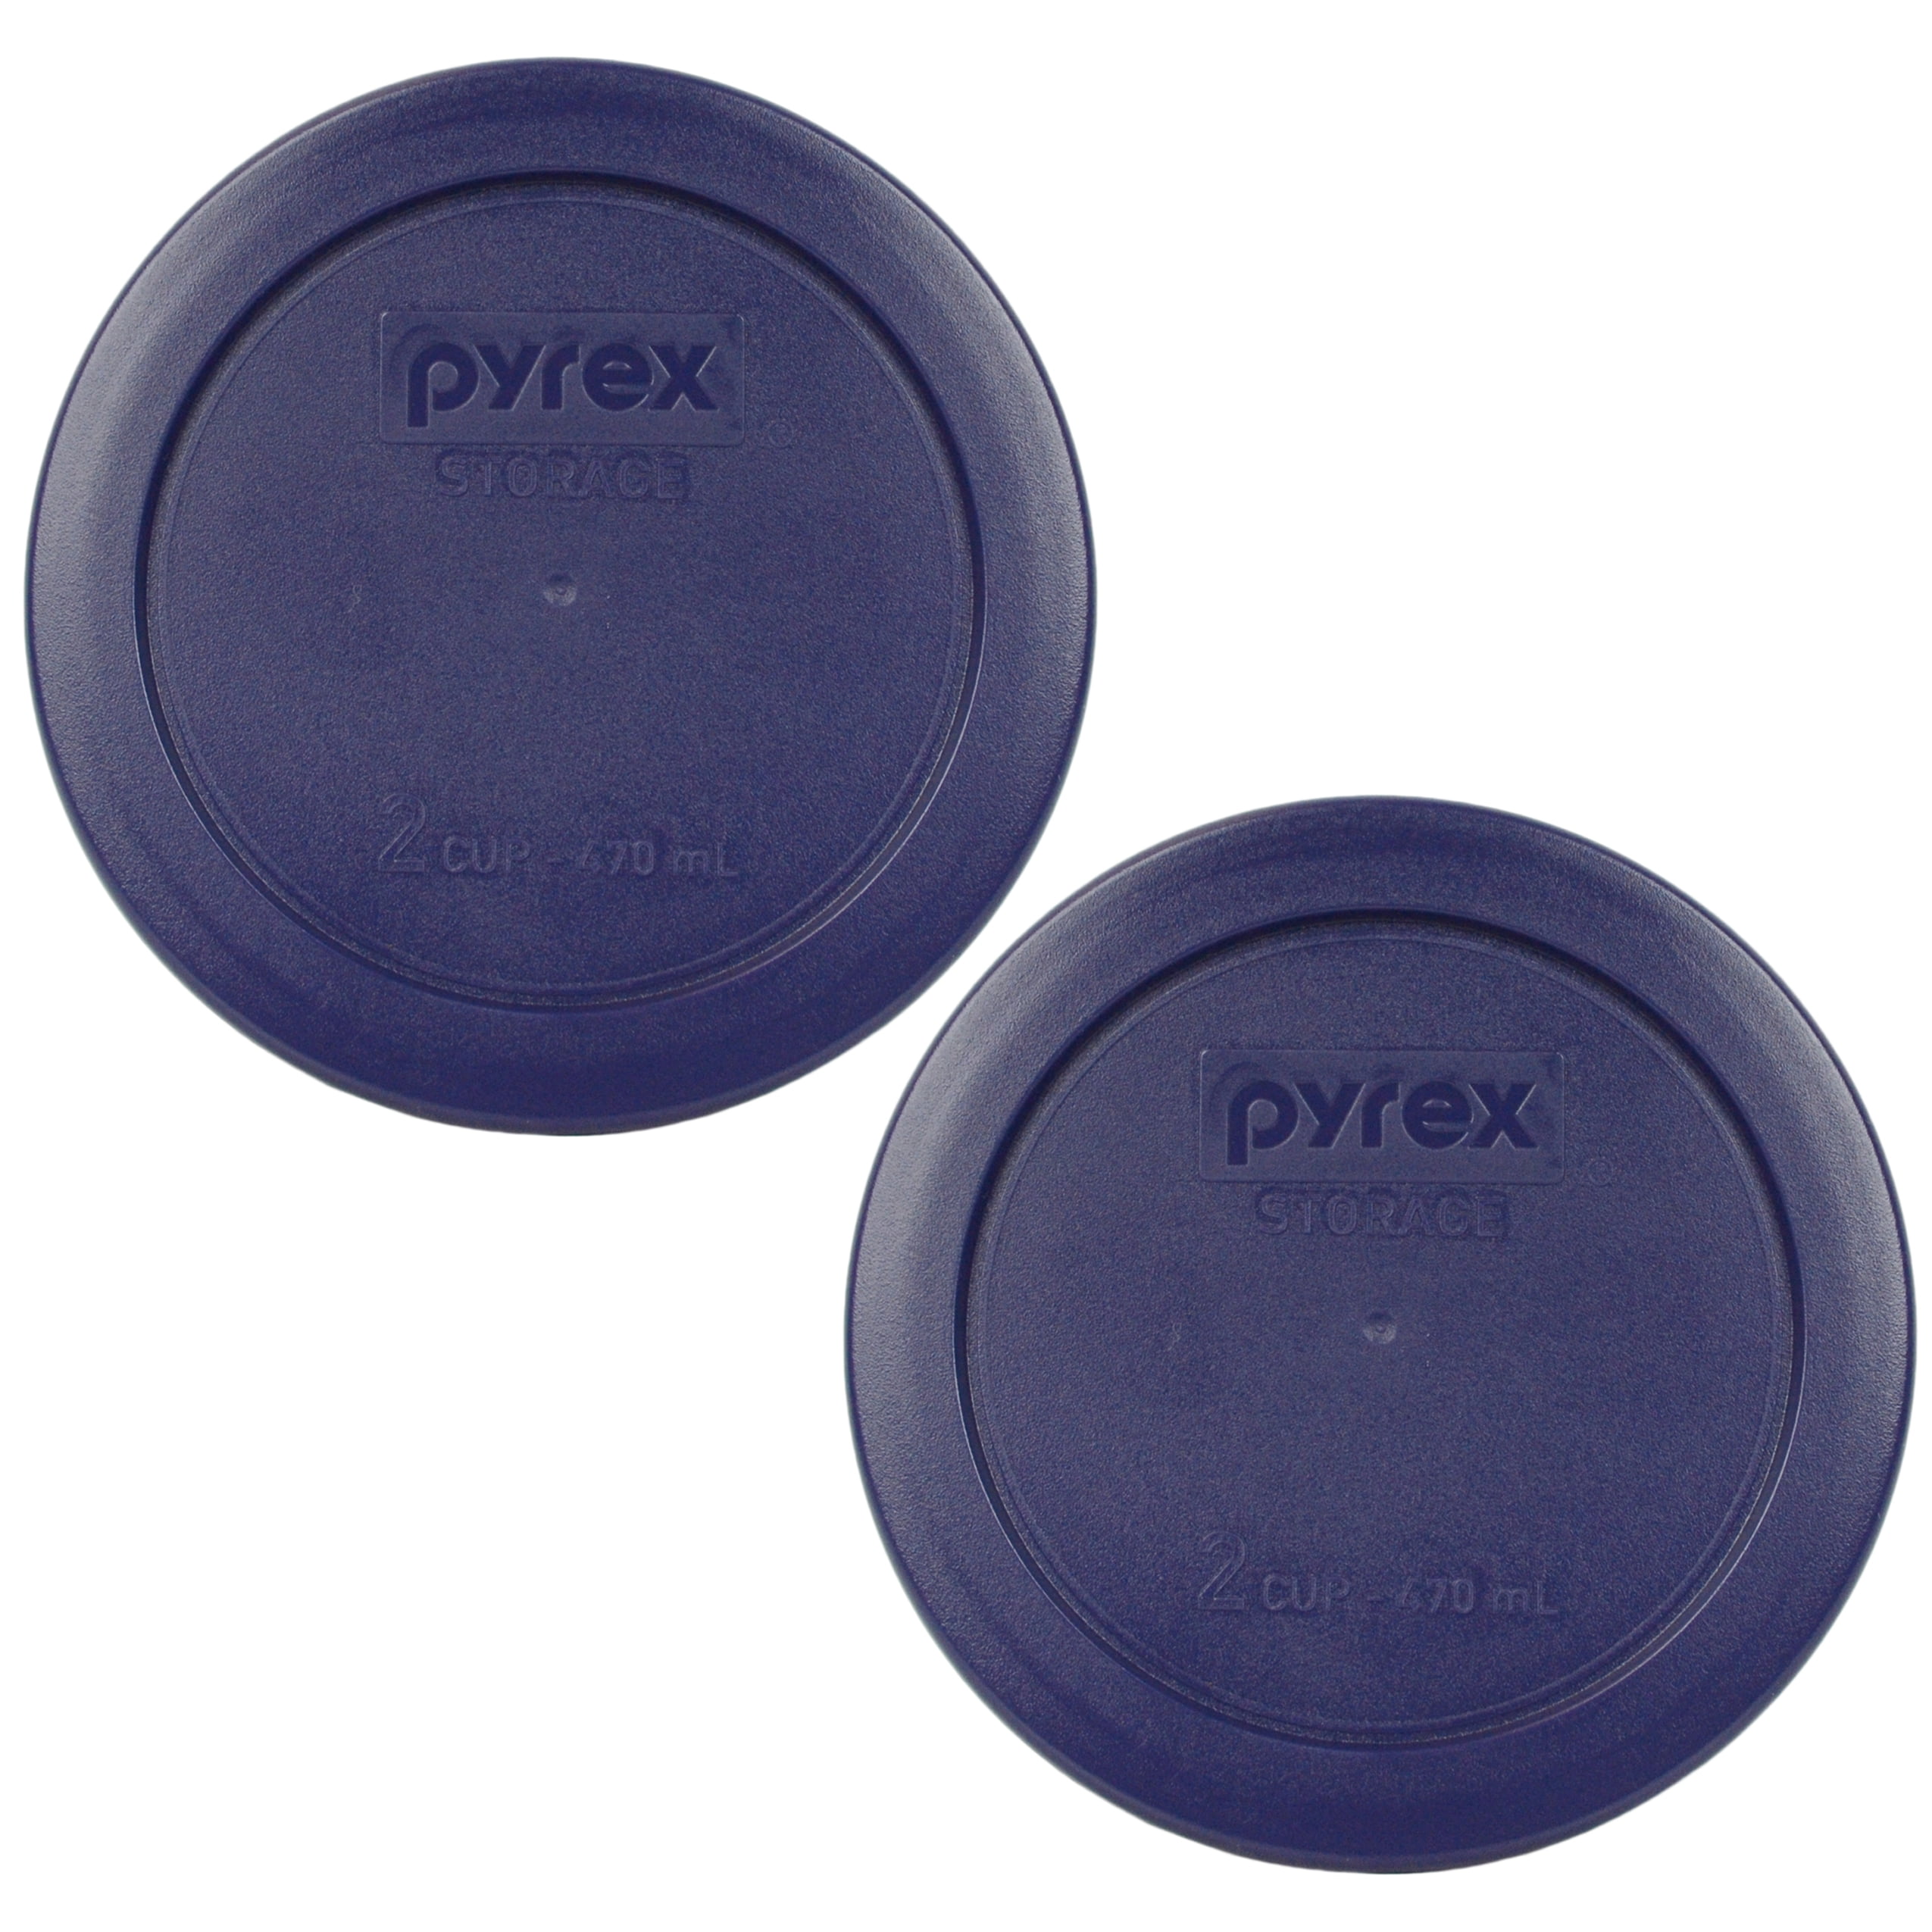 Pyrex Replacement Lid 7200-PC Blue Round Plastic Cover (2-Pack) for